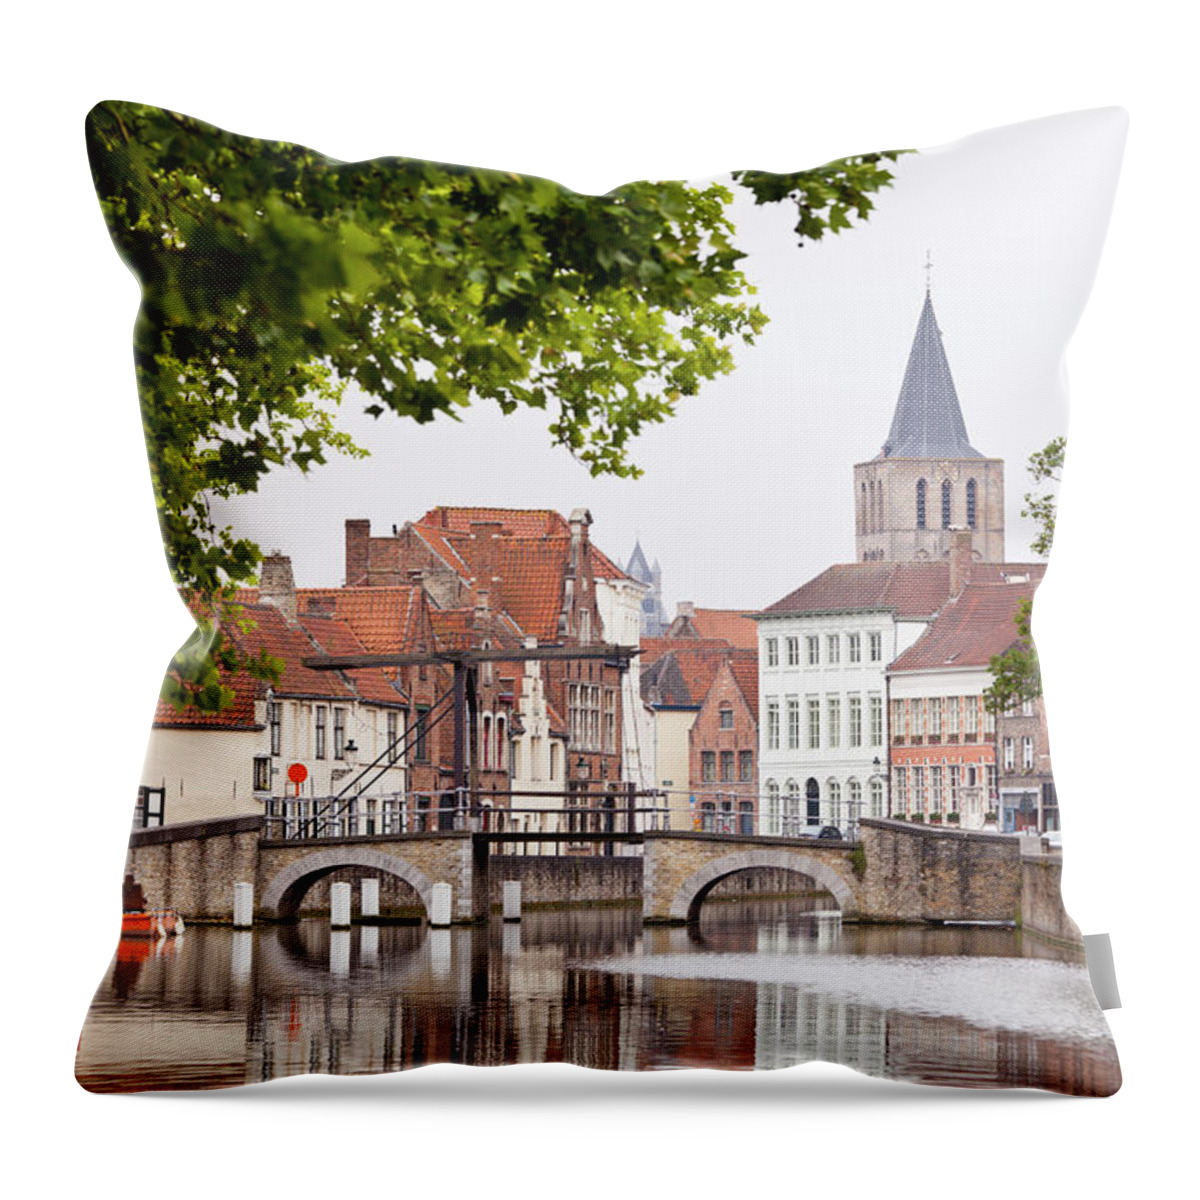 Belgium Throw Pillow featuring the photograph Canal Bridge At Potterierei In Bruges by Michaelutech